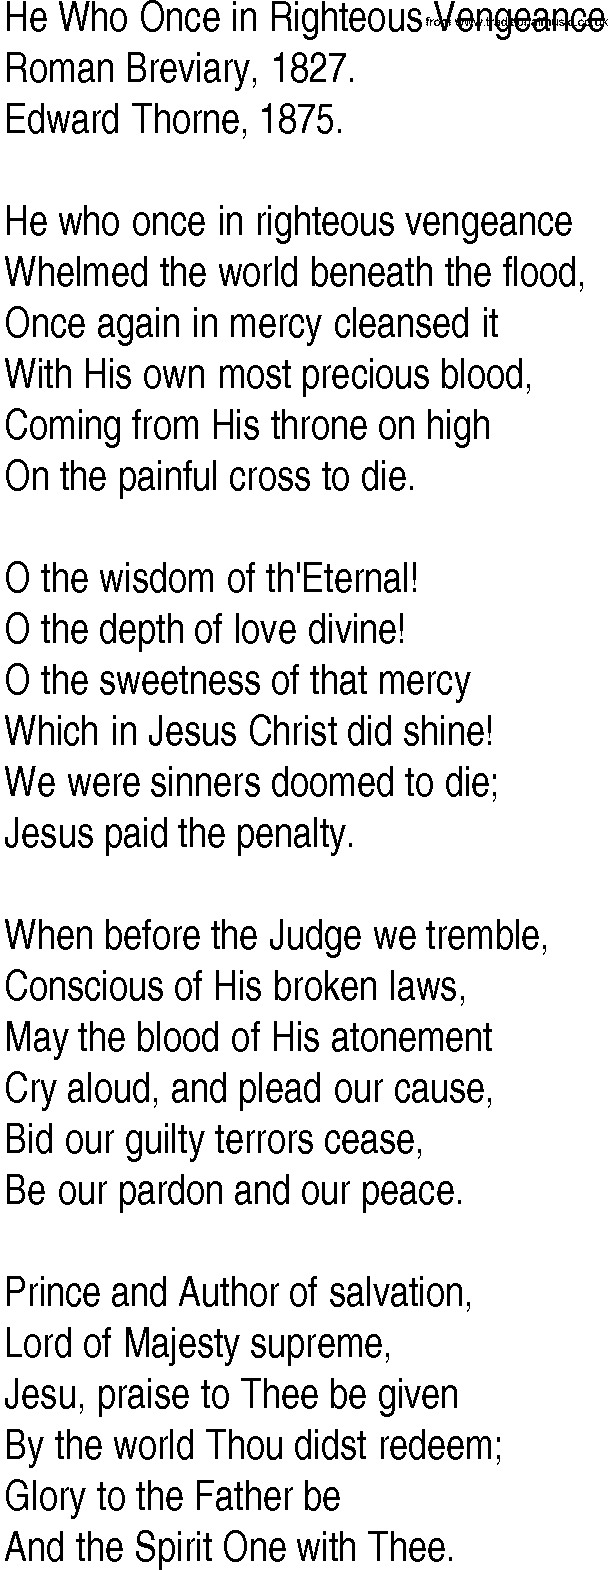 Hymn and Gospel Song: He Who Once in Righteous Vengeance by Roman Breviary lyrics